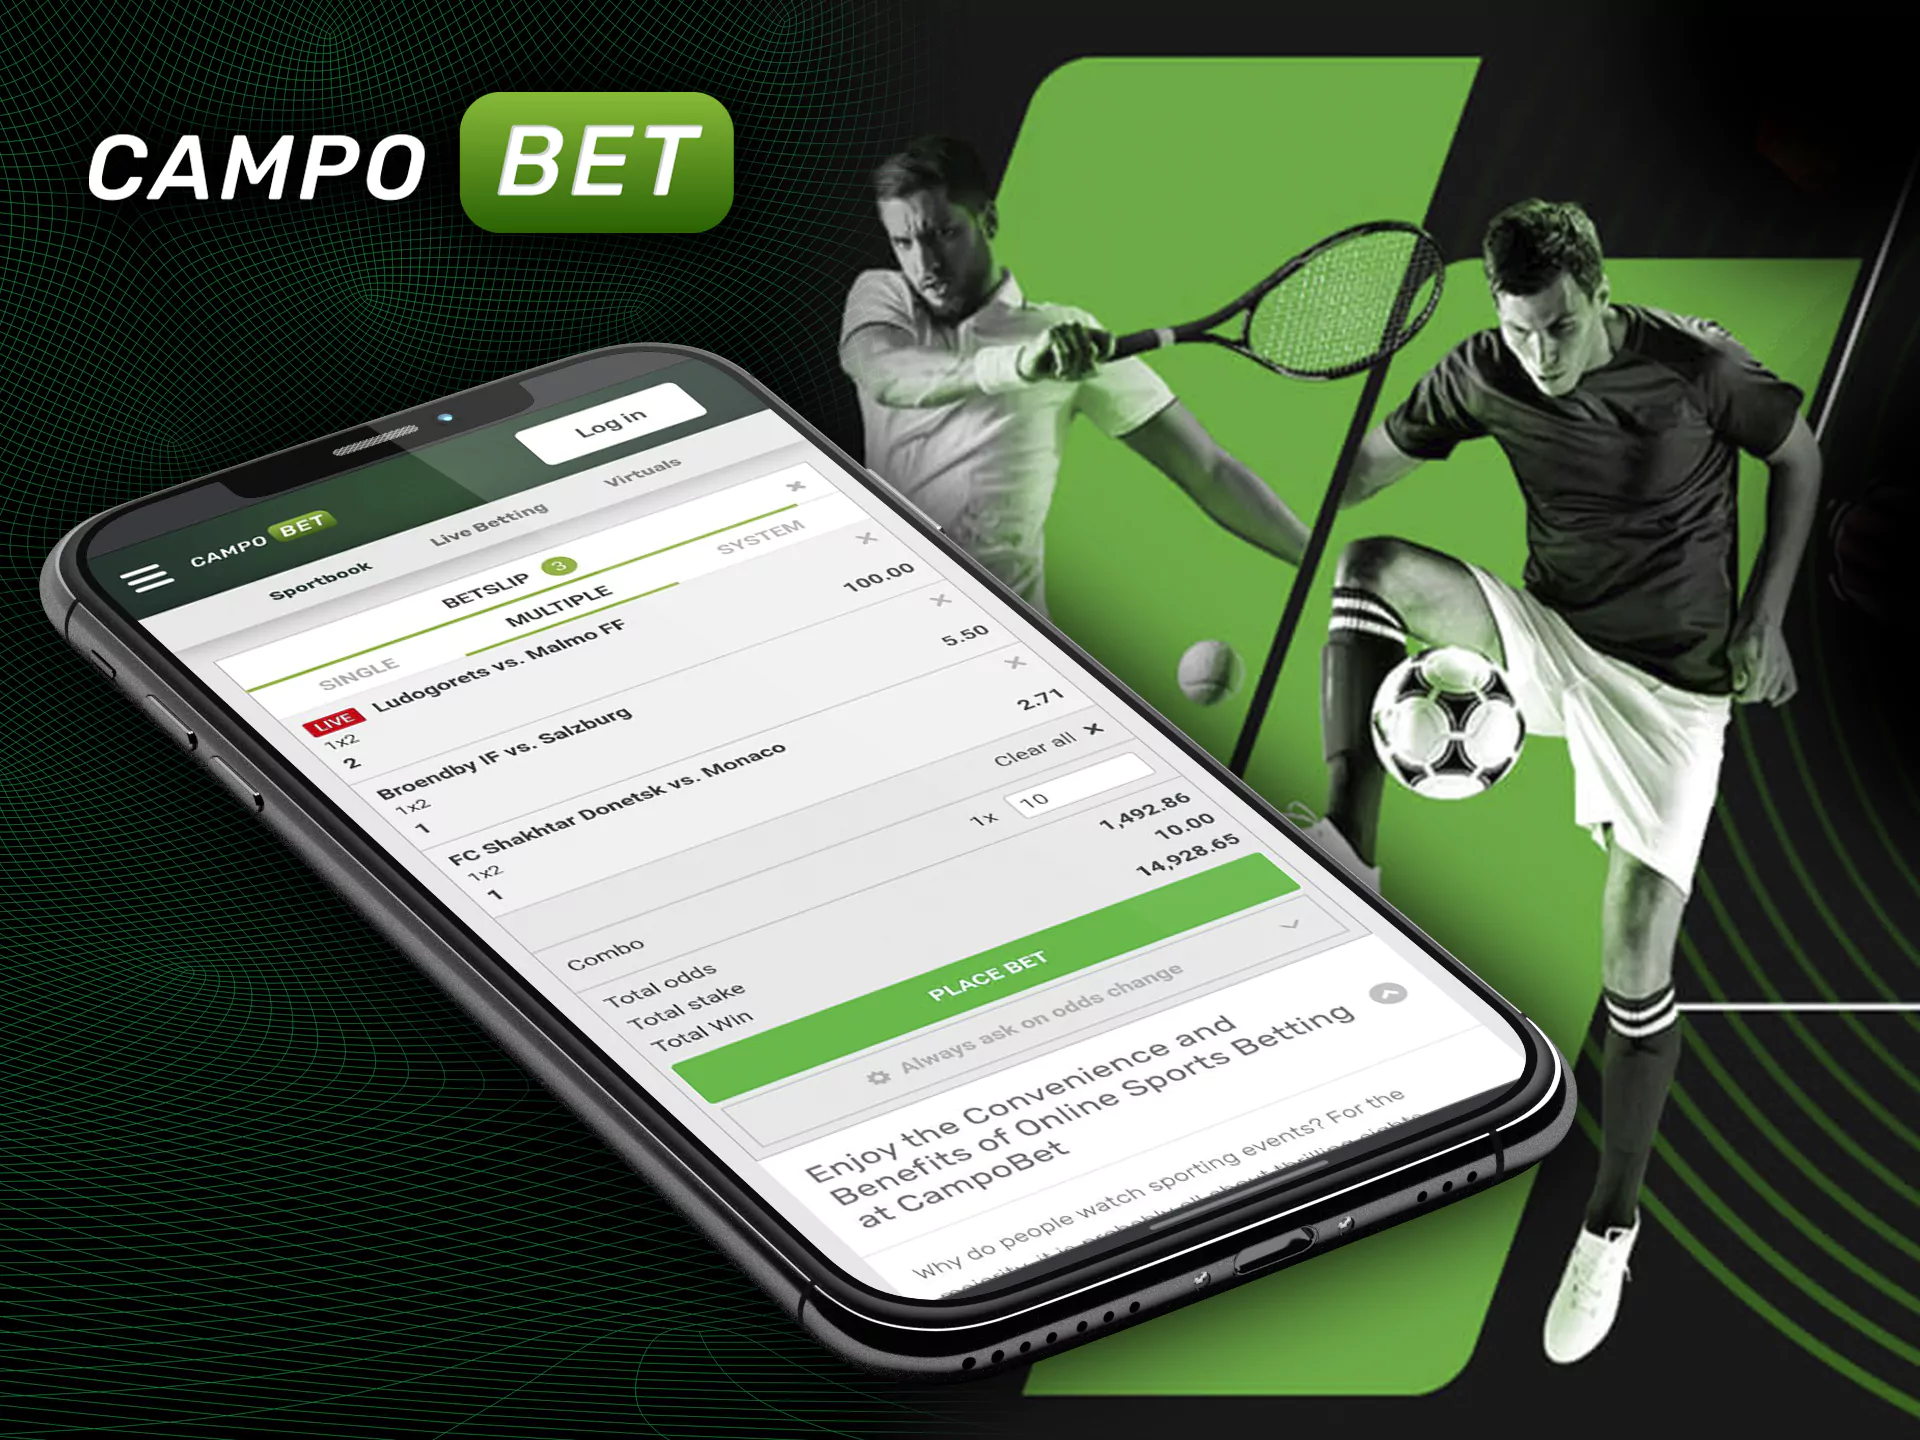 You can bet in the app as easily as on the site.